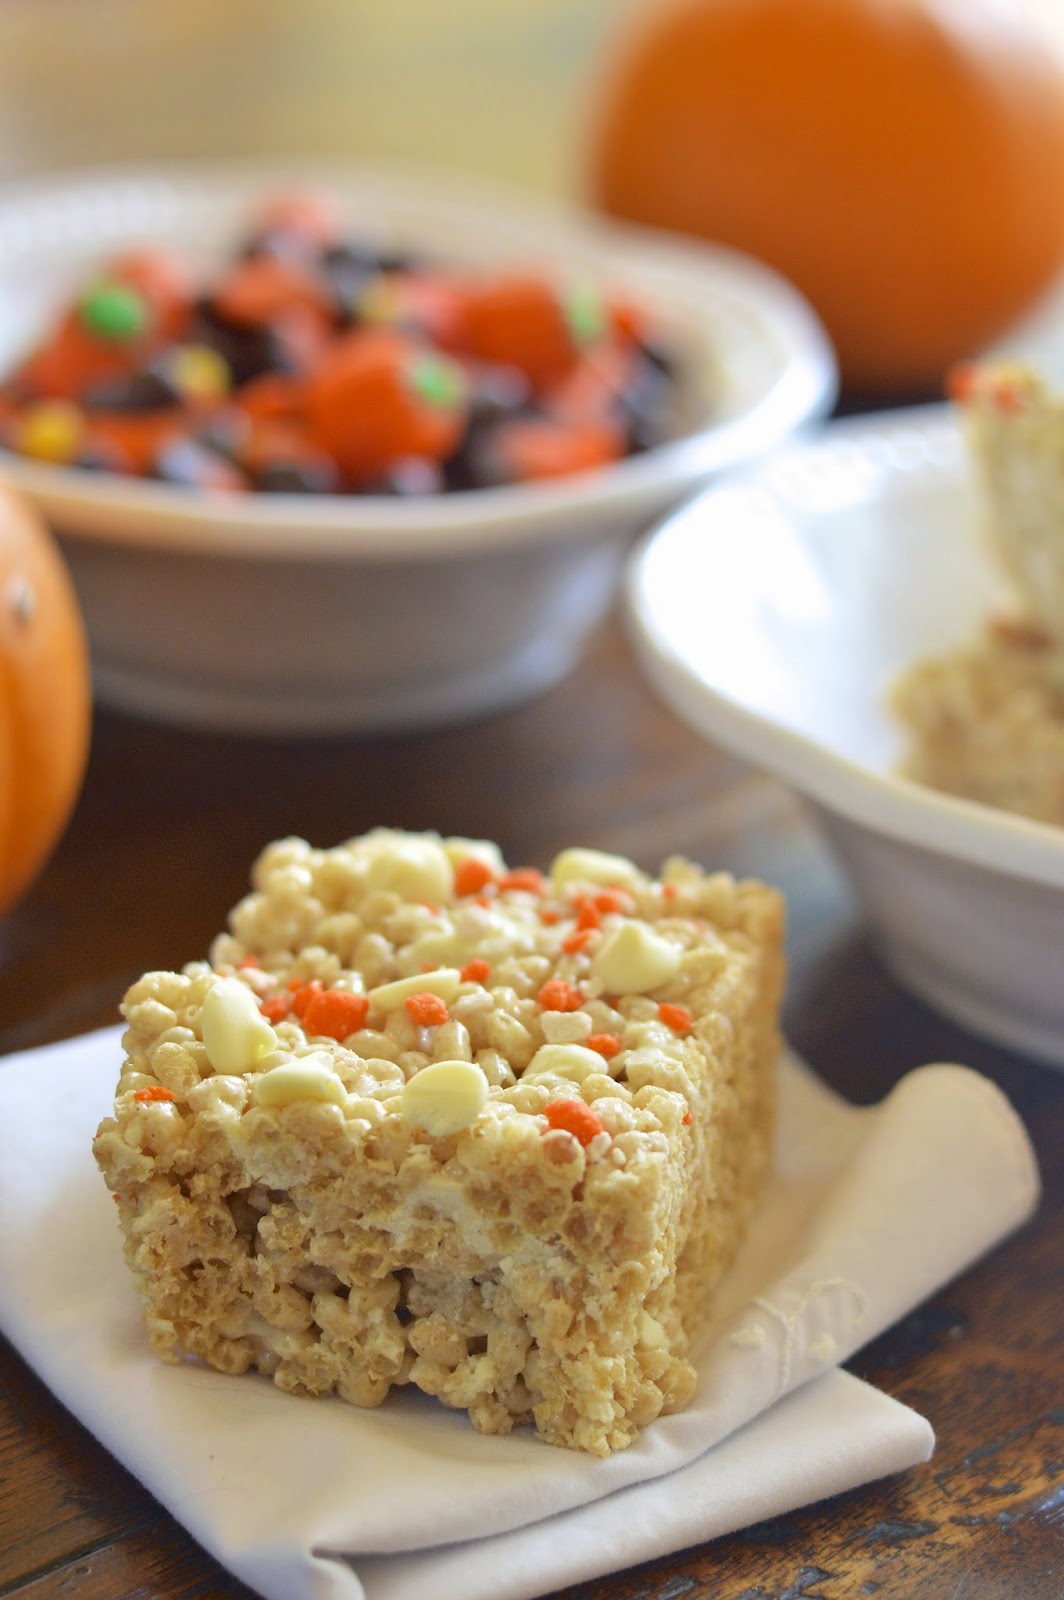 These creamy and crunchy rice krispie treats are studded with white chocolate chips and lightly flavored with pumpkin pie spice #glutenfree #halloween